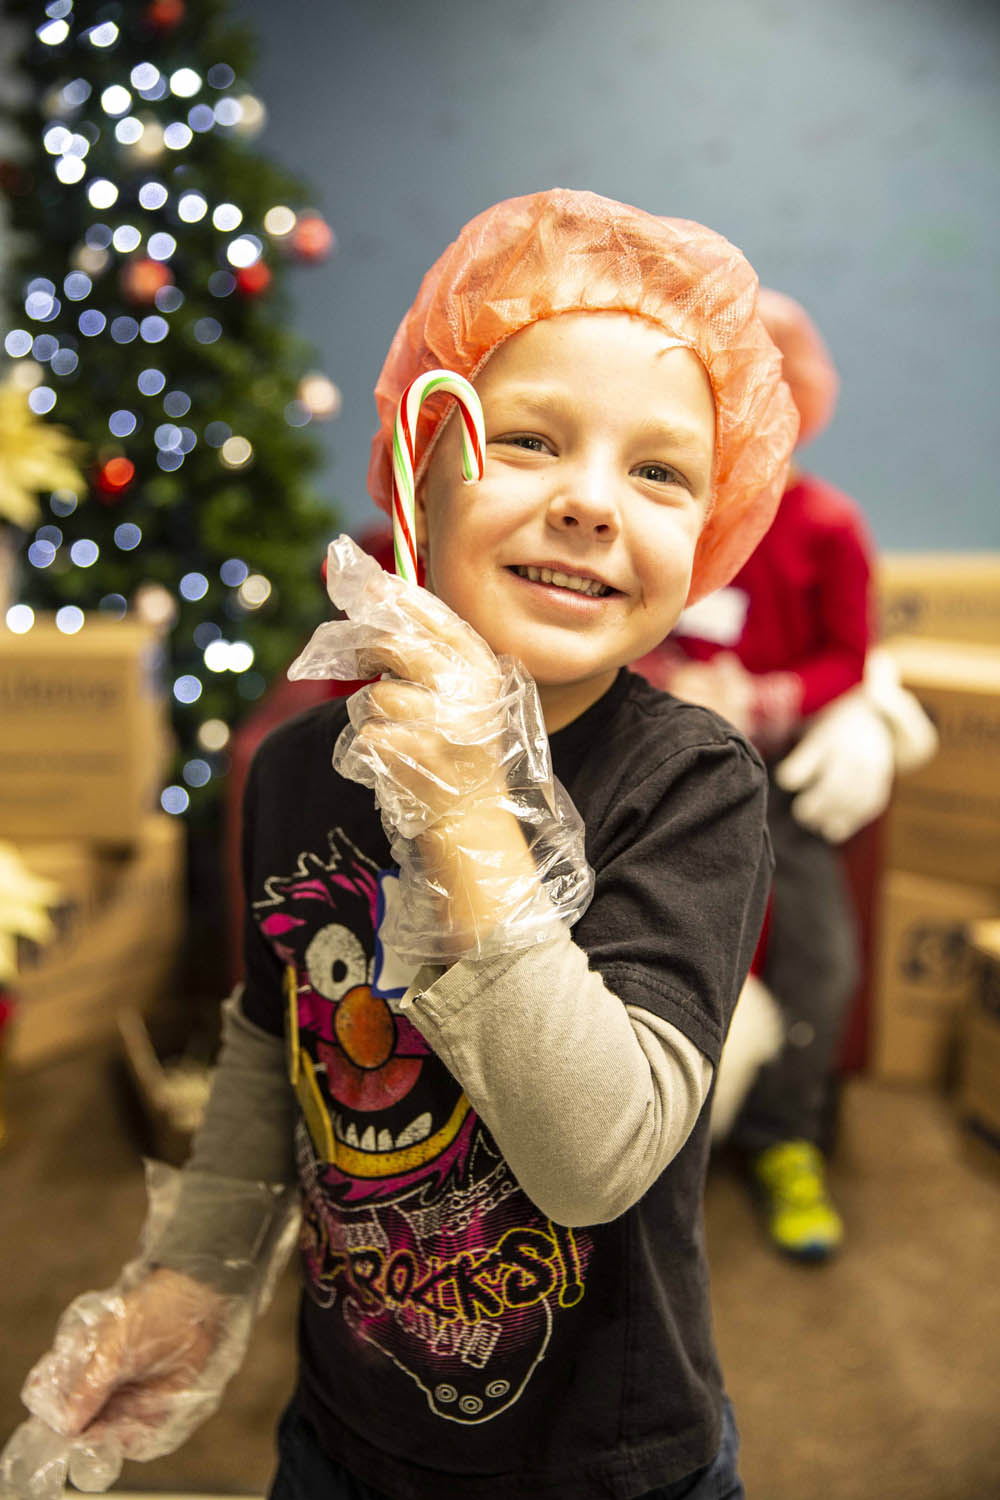 Lifeline Christmas Event - Smiling Boy with Candy Cane